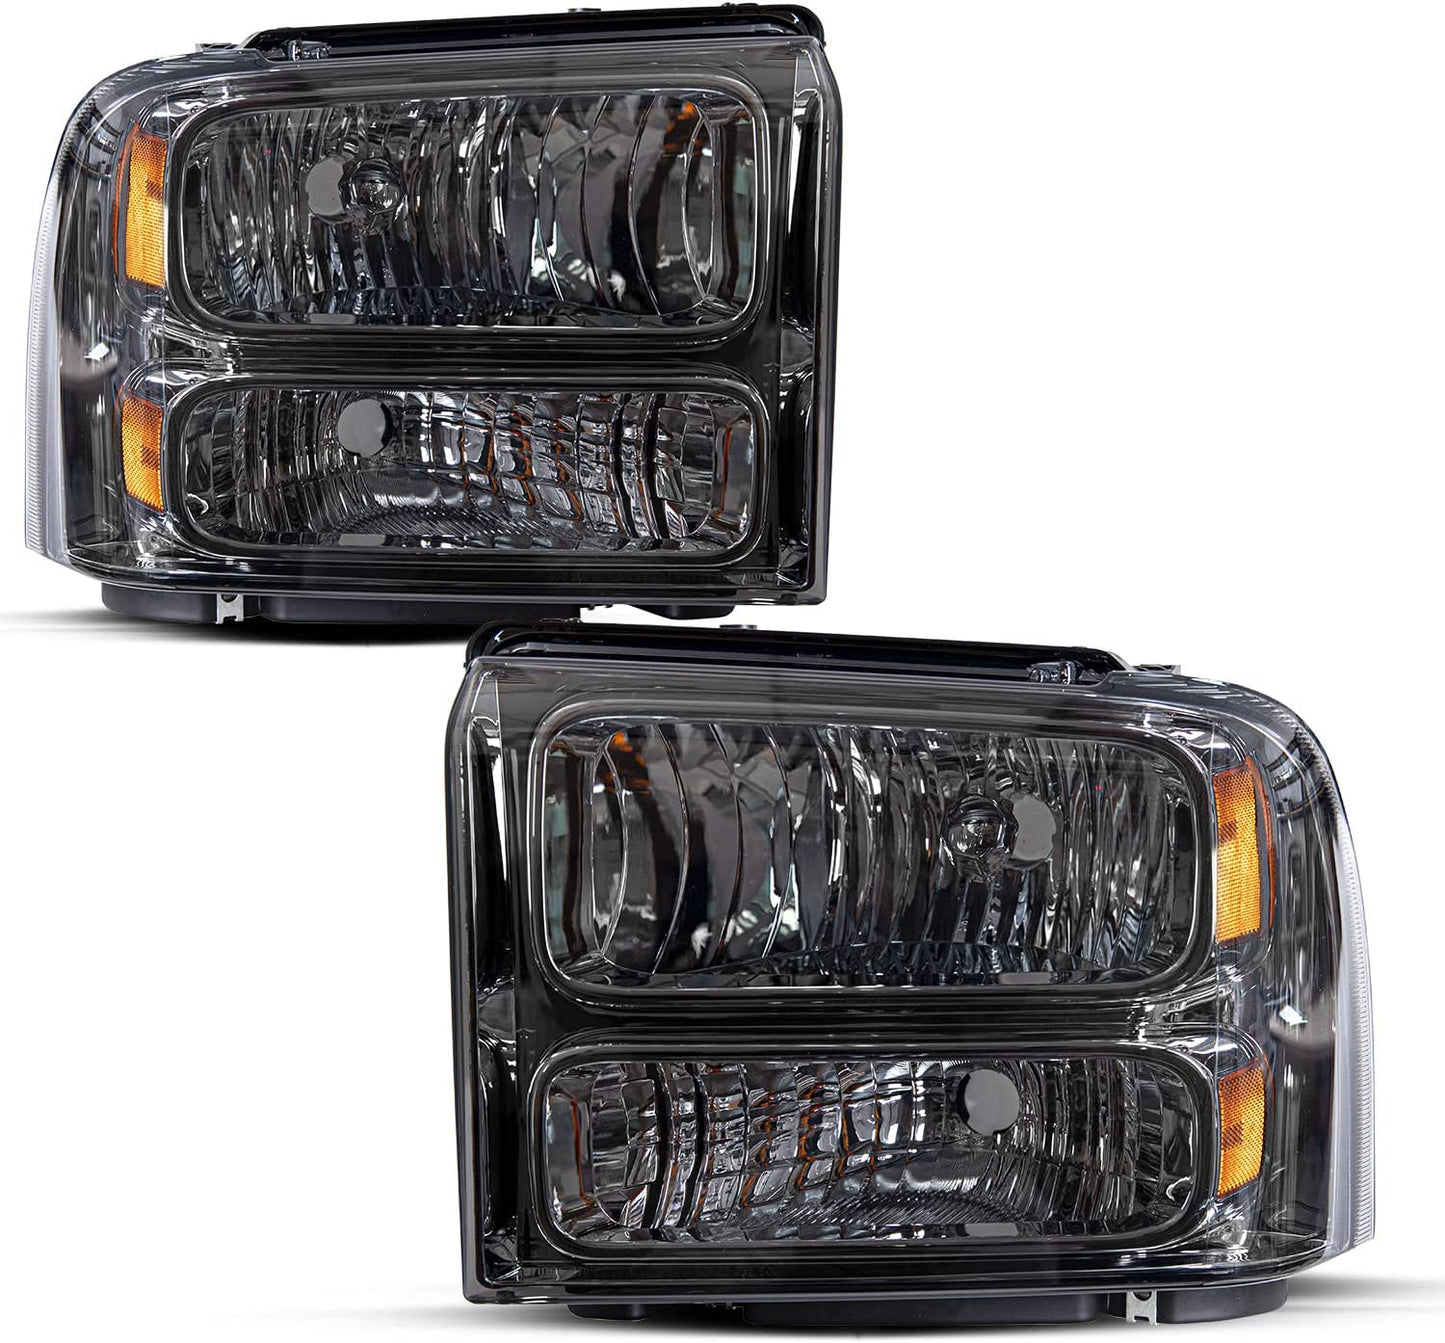 Headlight Assembly with 2005-2007 Ford F250 F350 F450 F550